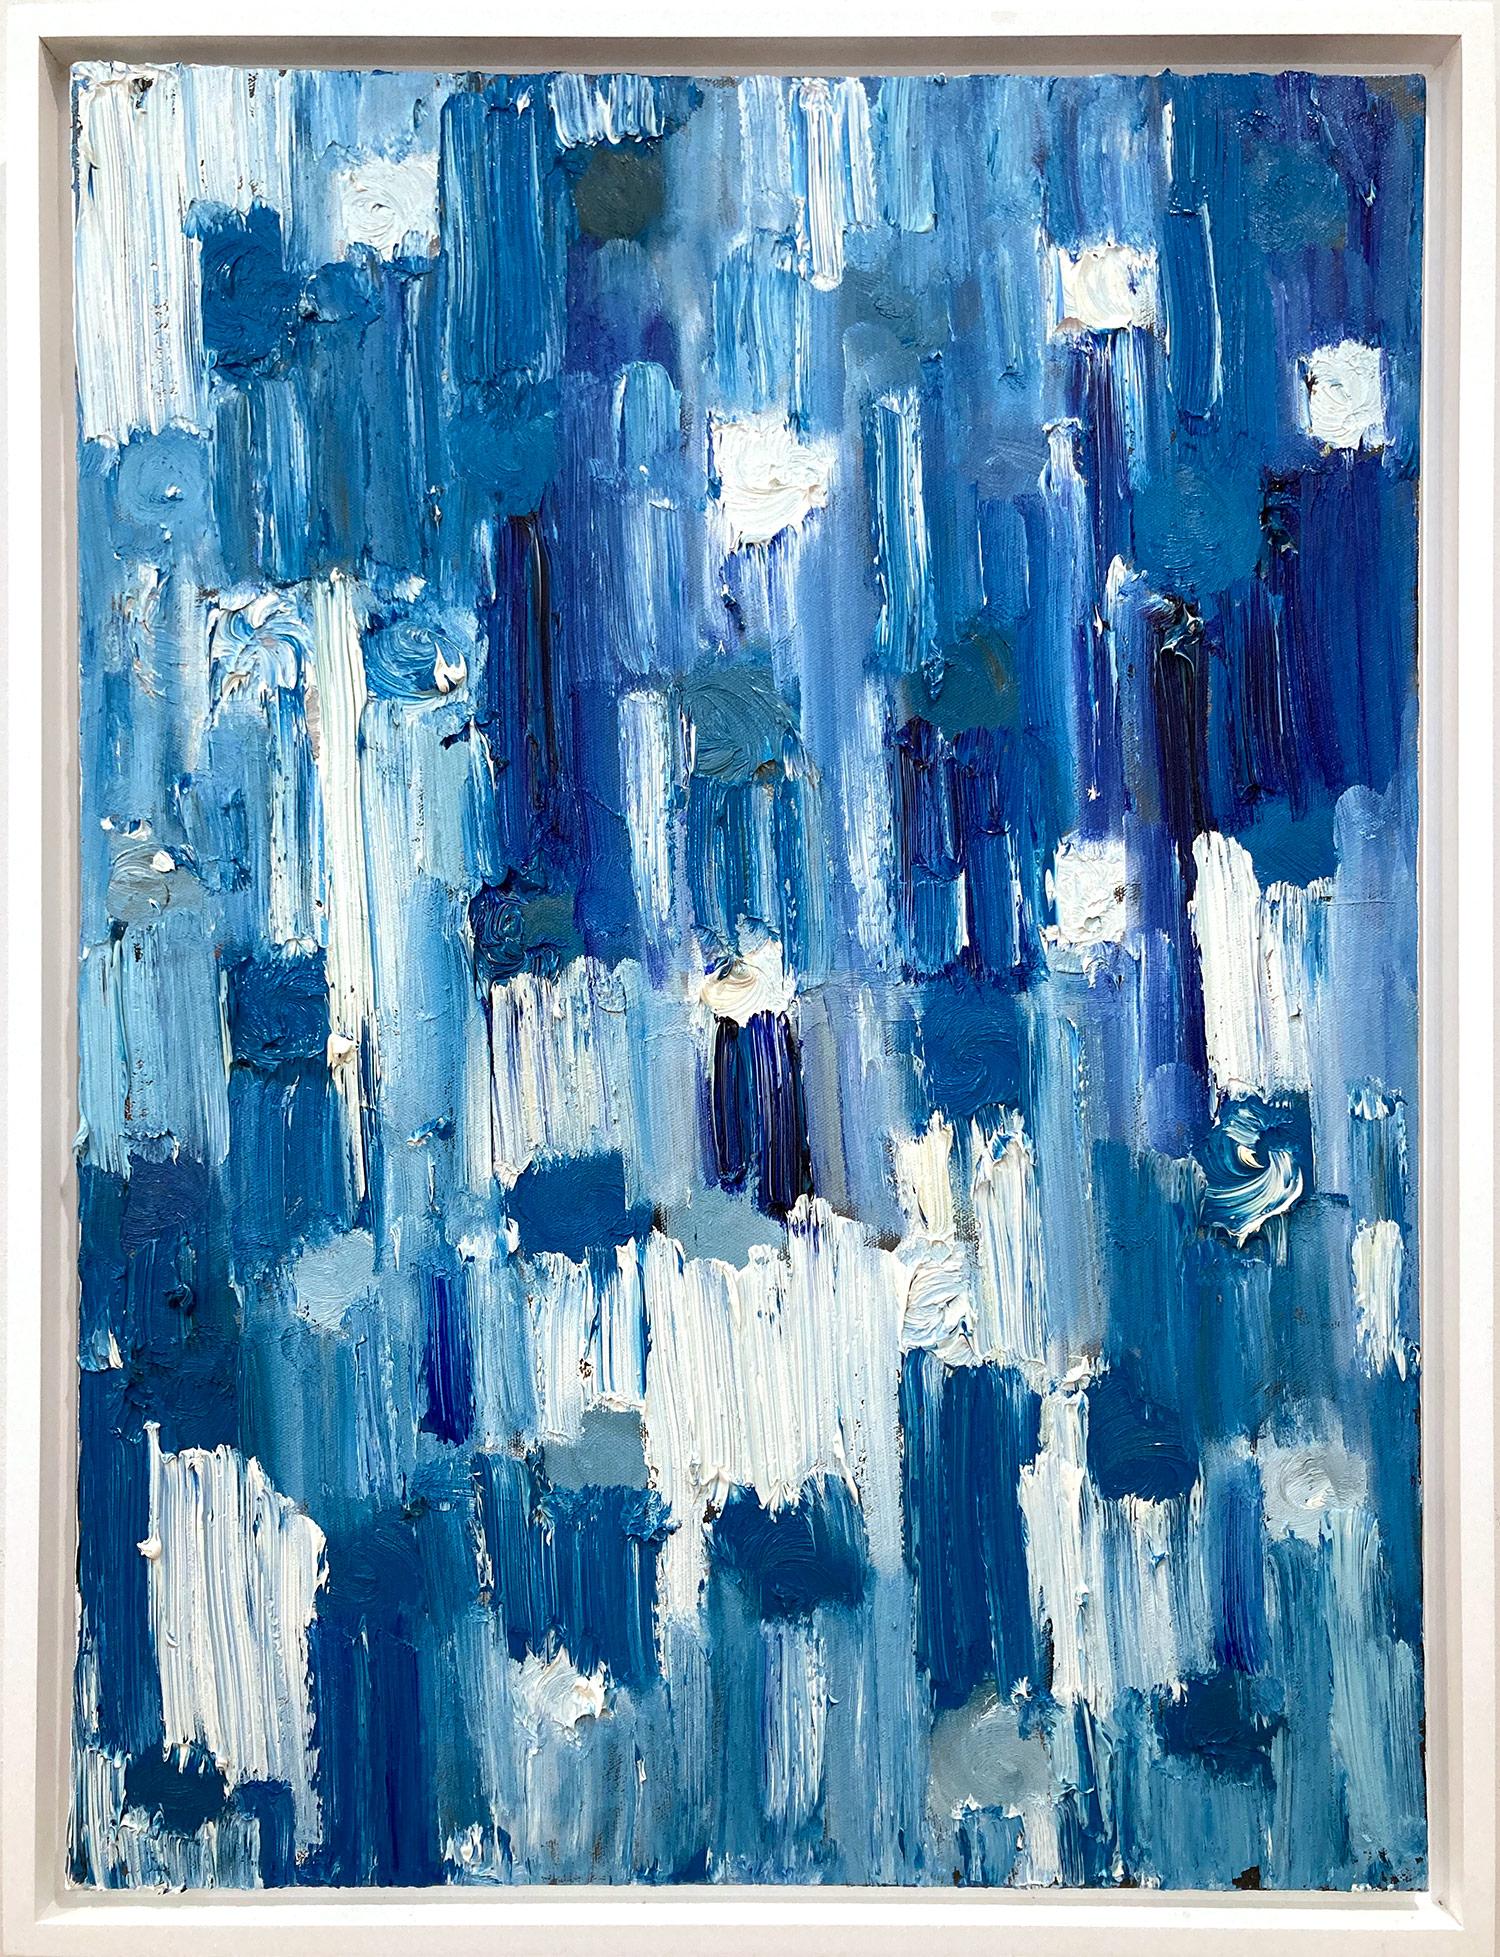 Cindy Shaoul Abstract Painting - "Dripping Dots - Maldives" Blue Colorful Abstract Oil Painting on Canvas